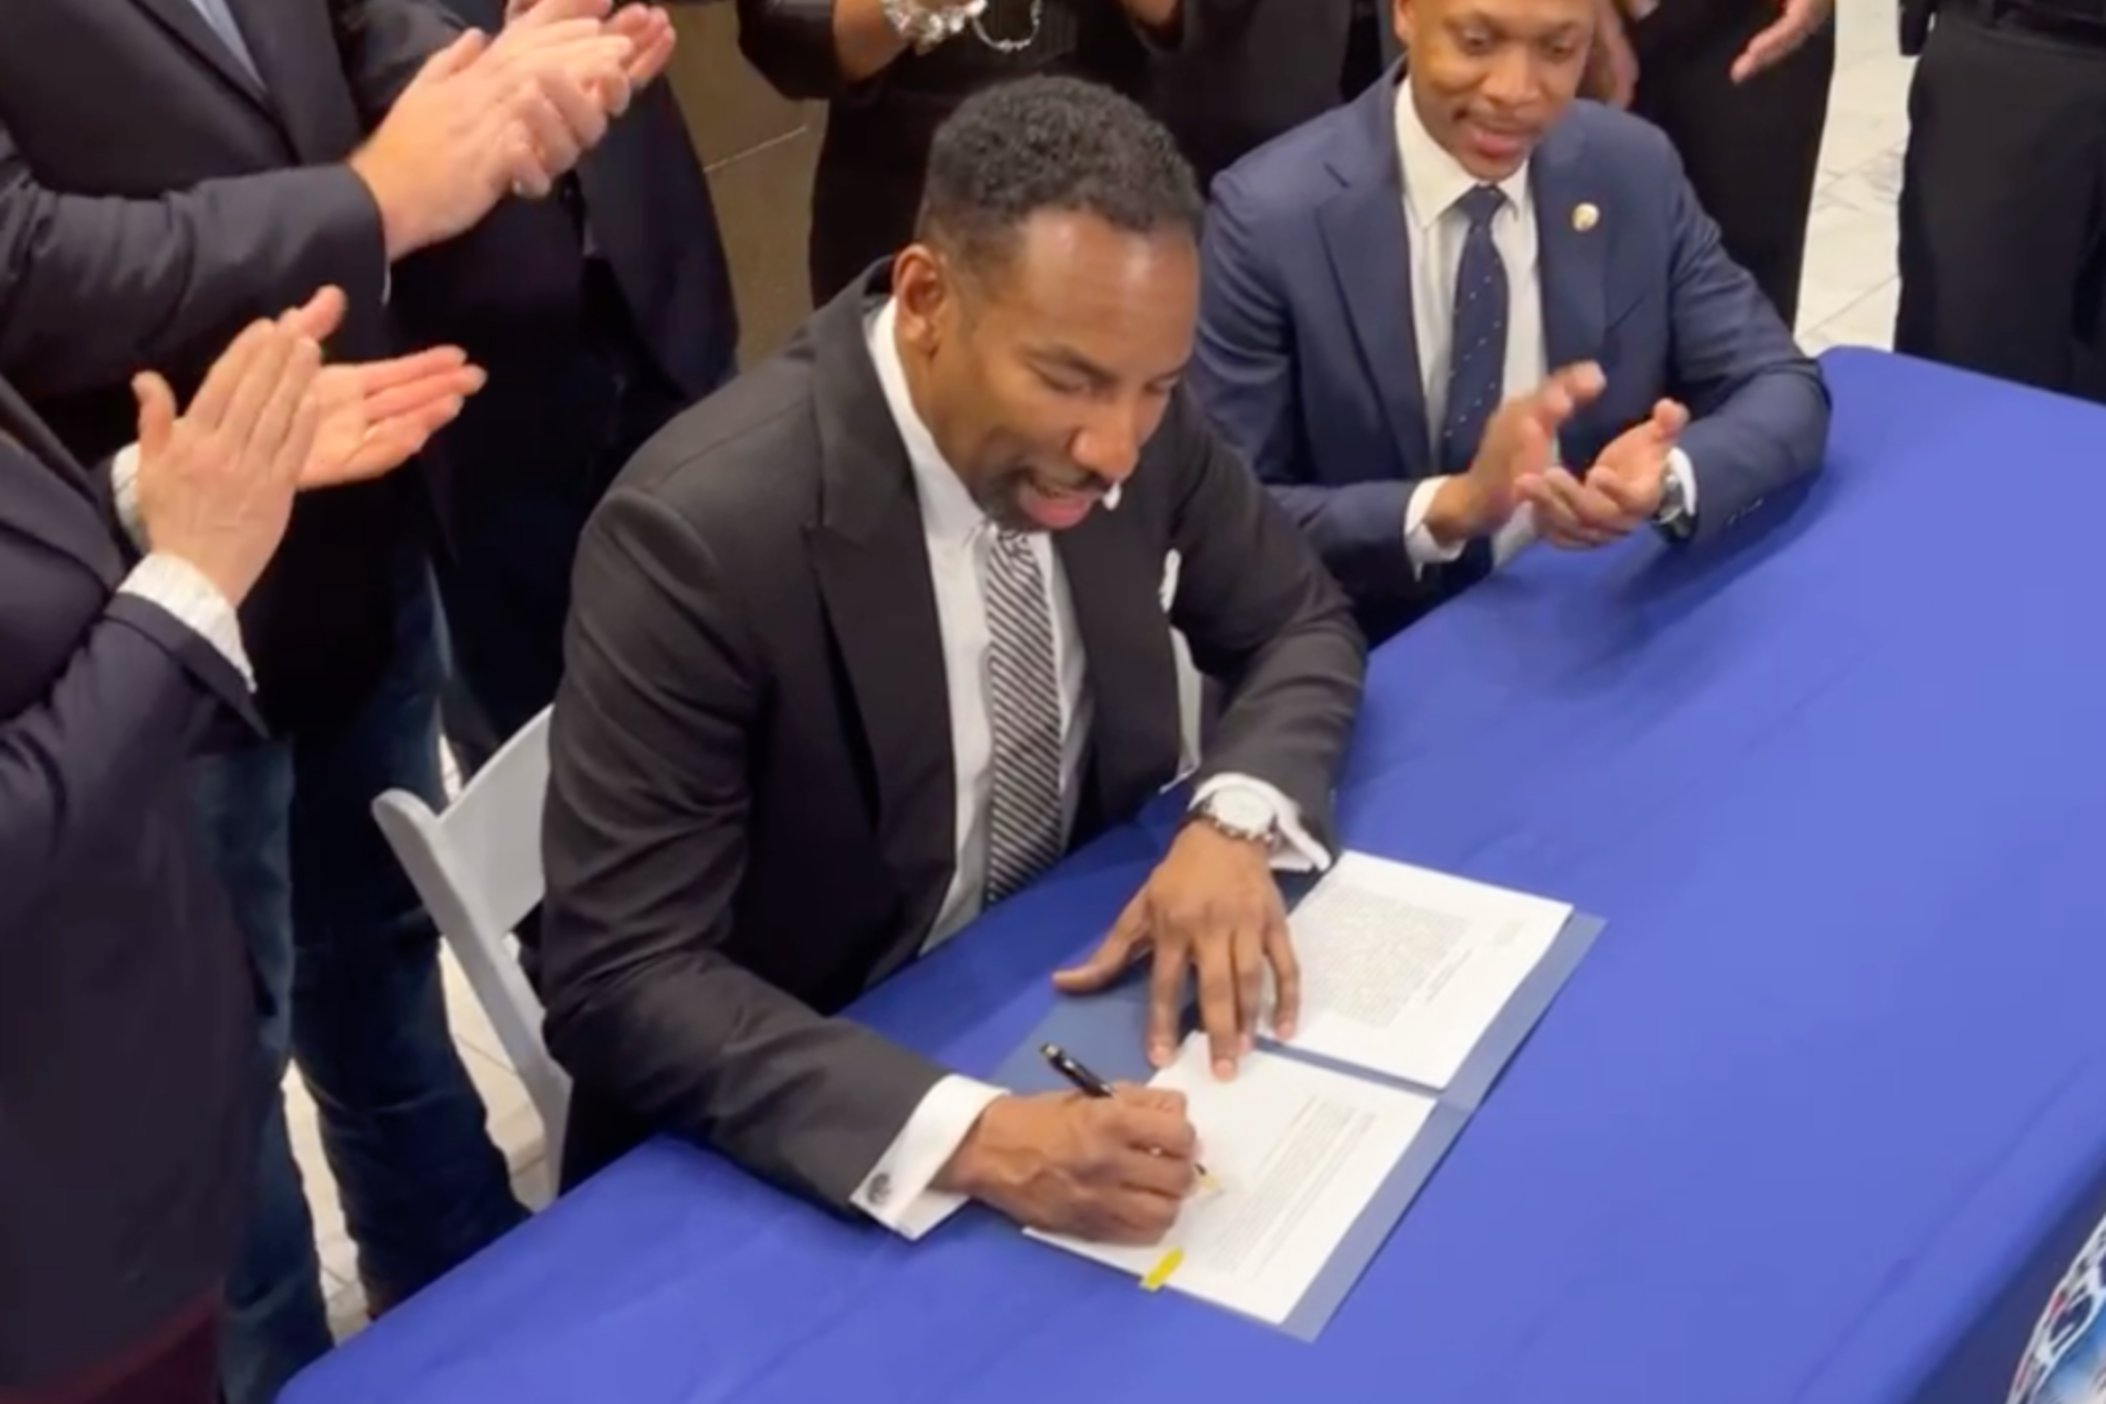 Atlanta City Councilmember Jason Winston looks on as Mayor Andre Dickens signs an executive order to utilize $4.6 million to help the city’s homeless population at a ceremony on Jan. 24 at city hall